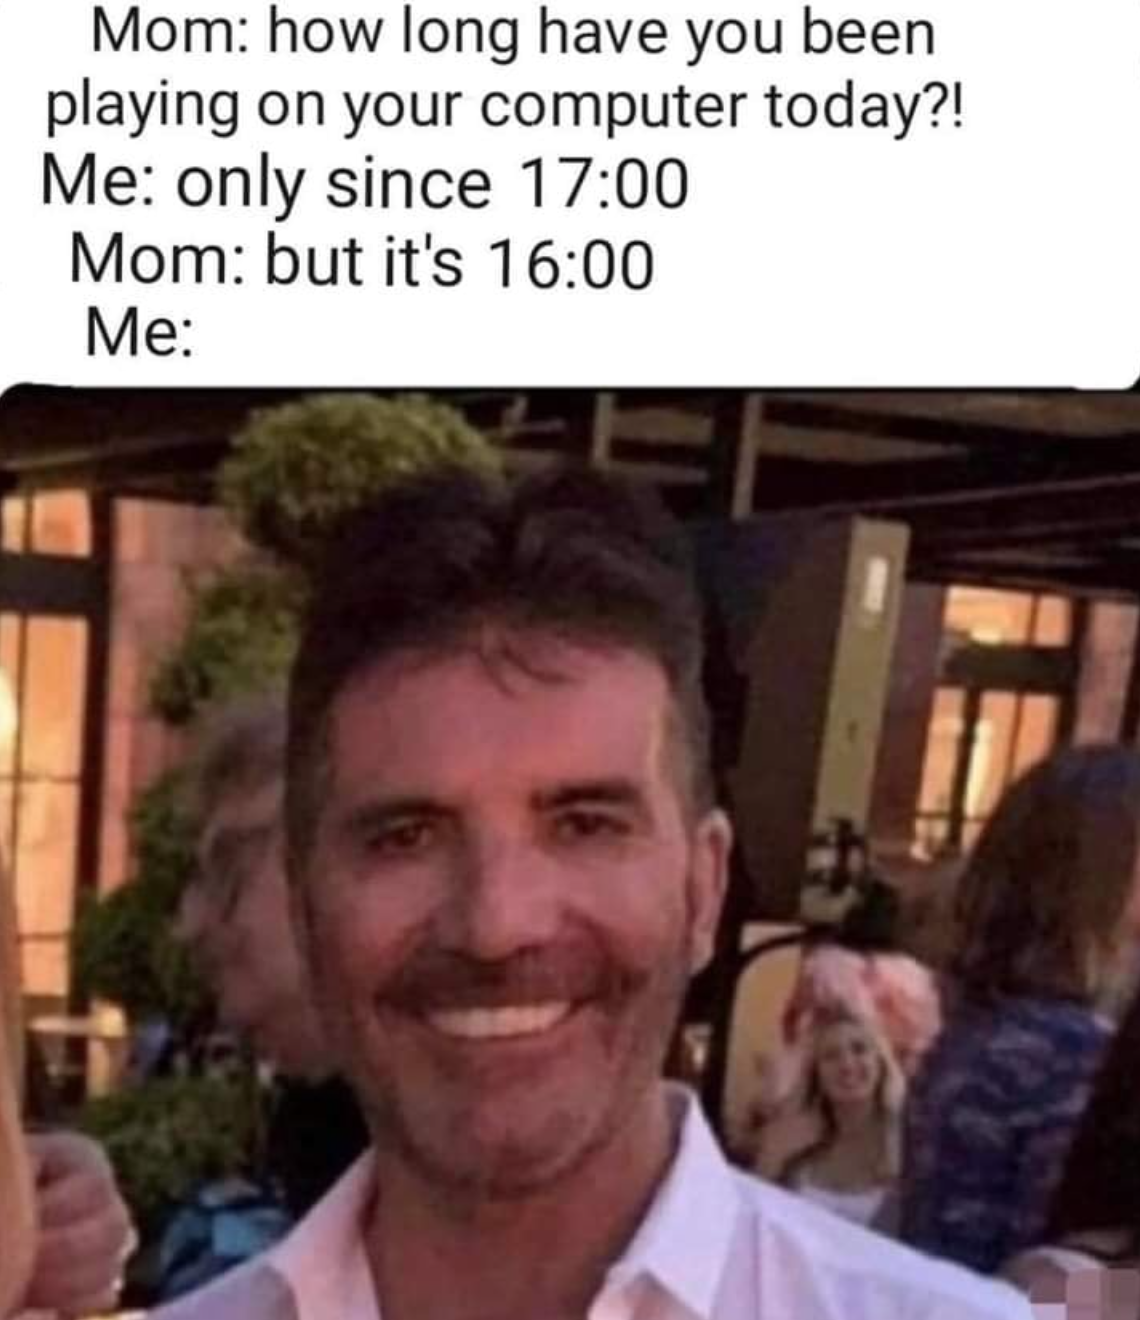 funny gaming memes  - simon cowell meme - Mom how long have you been playing on your computer today?! Me only since Mom but it's Me